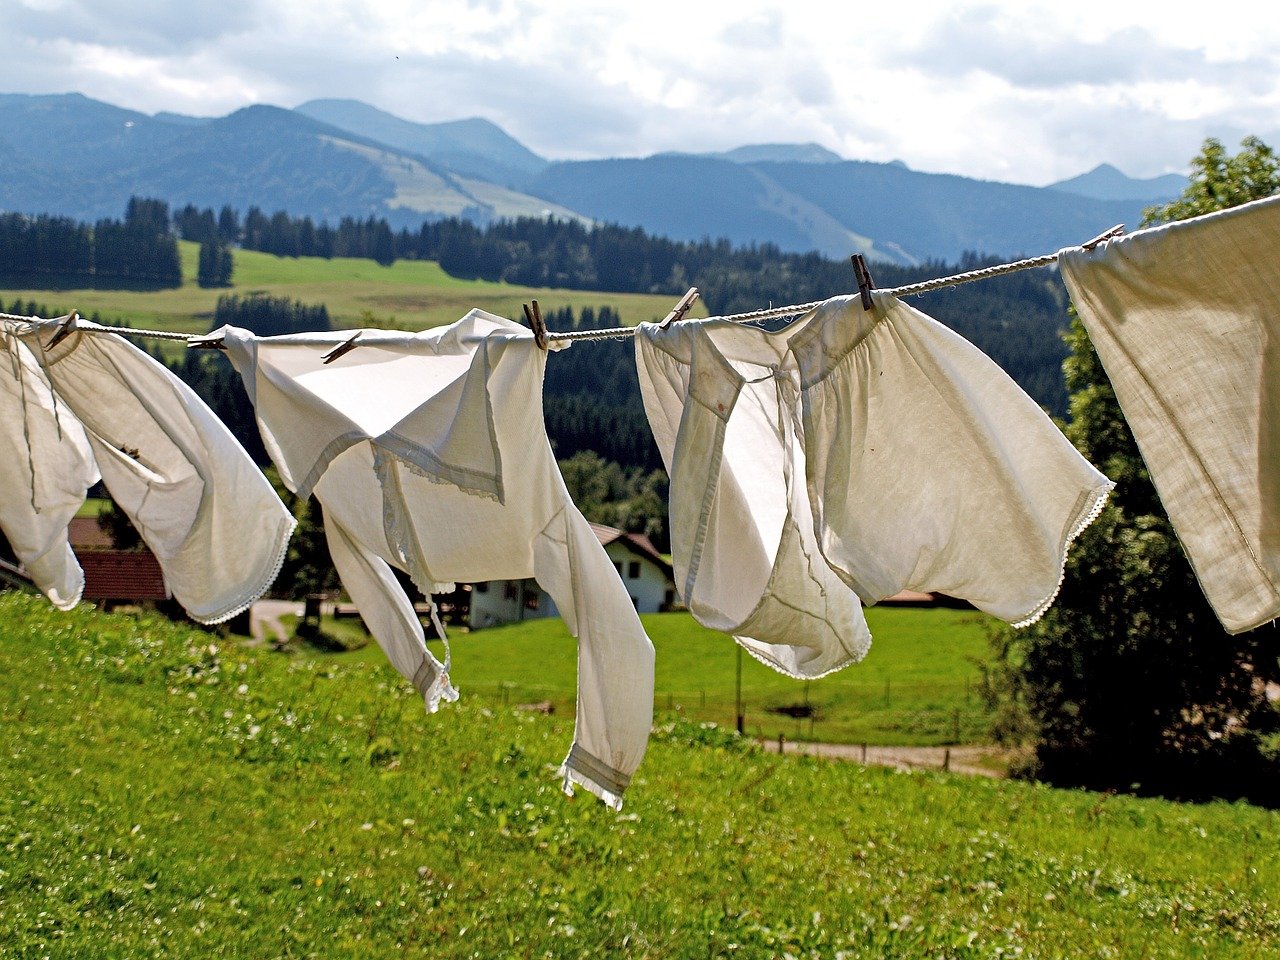 Do clothes dry faster on a windy day or on a sunny day?